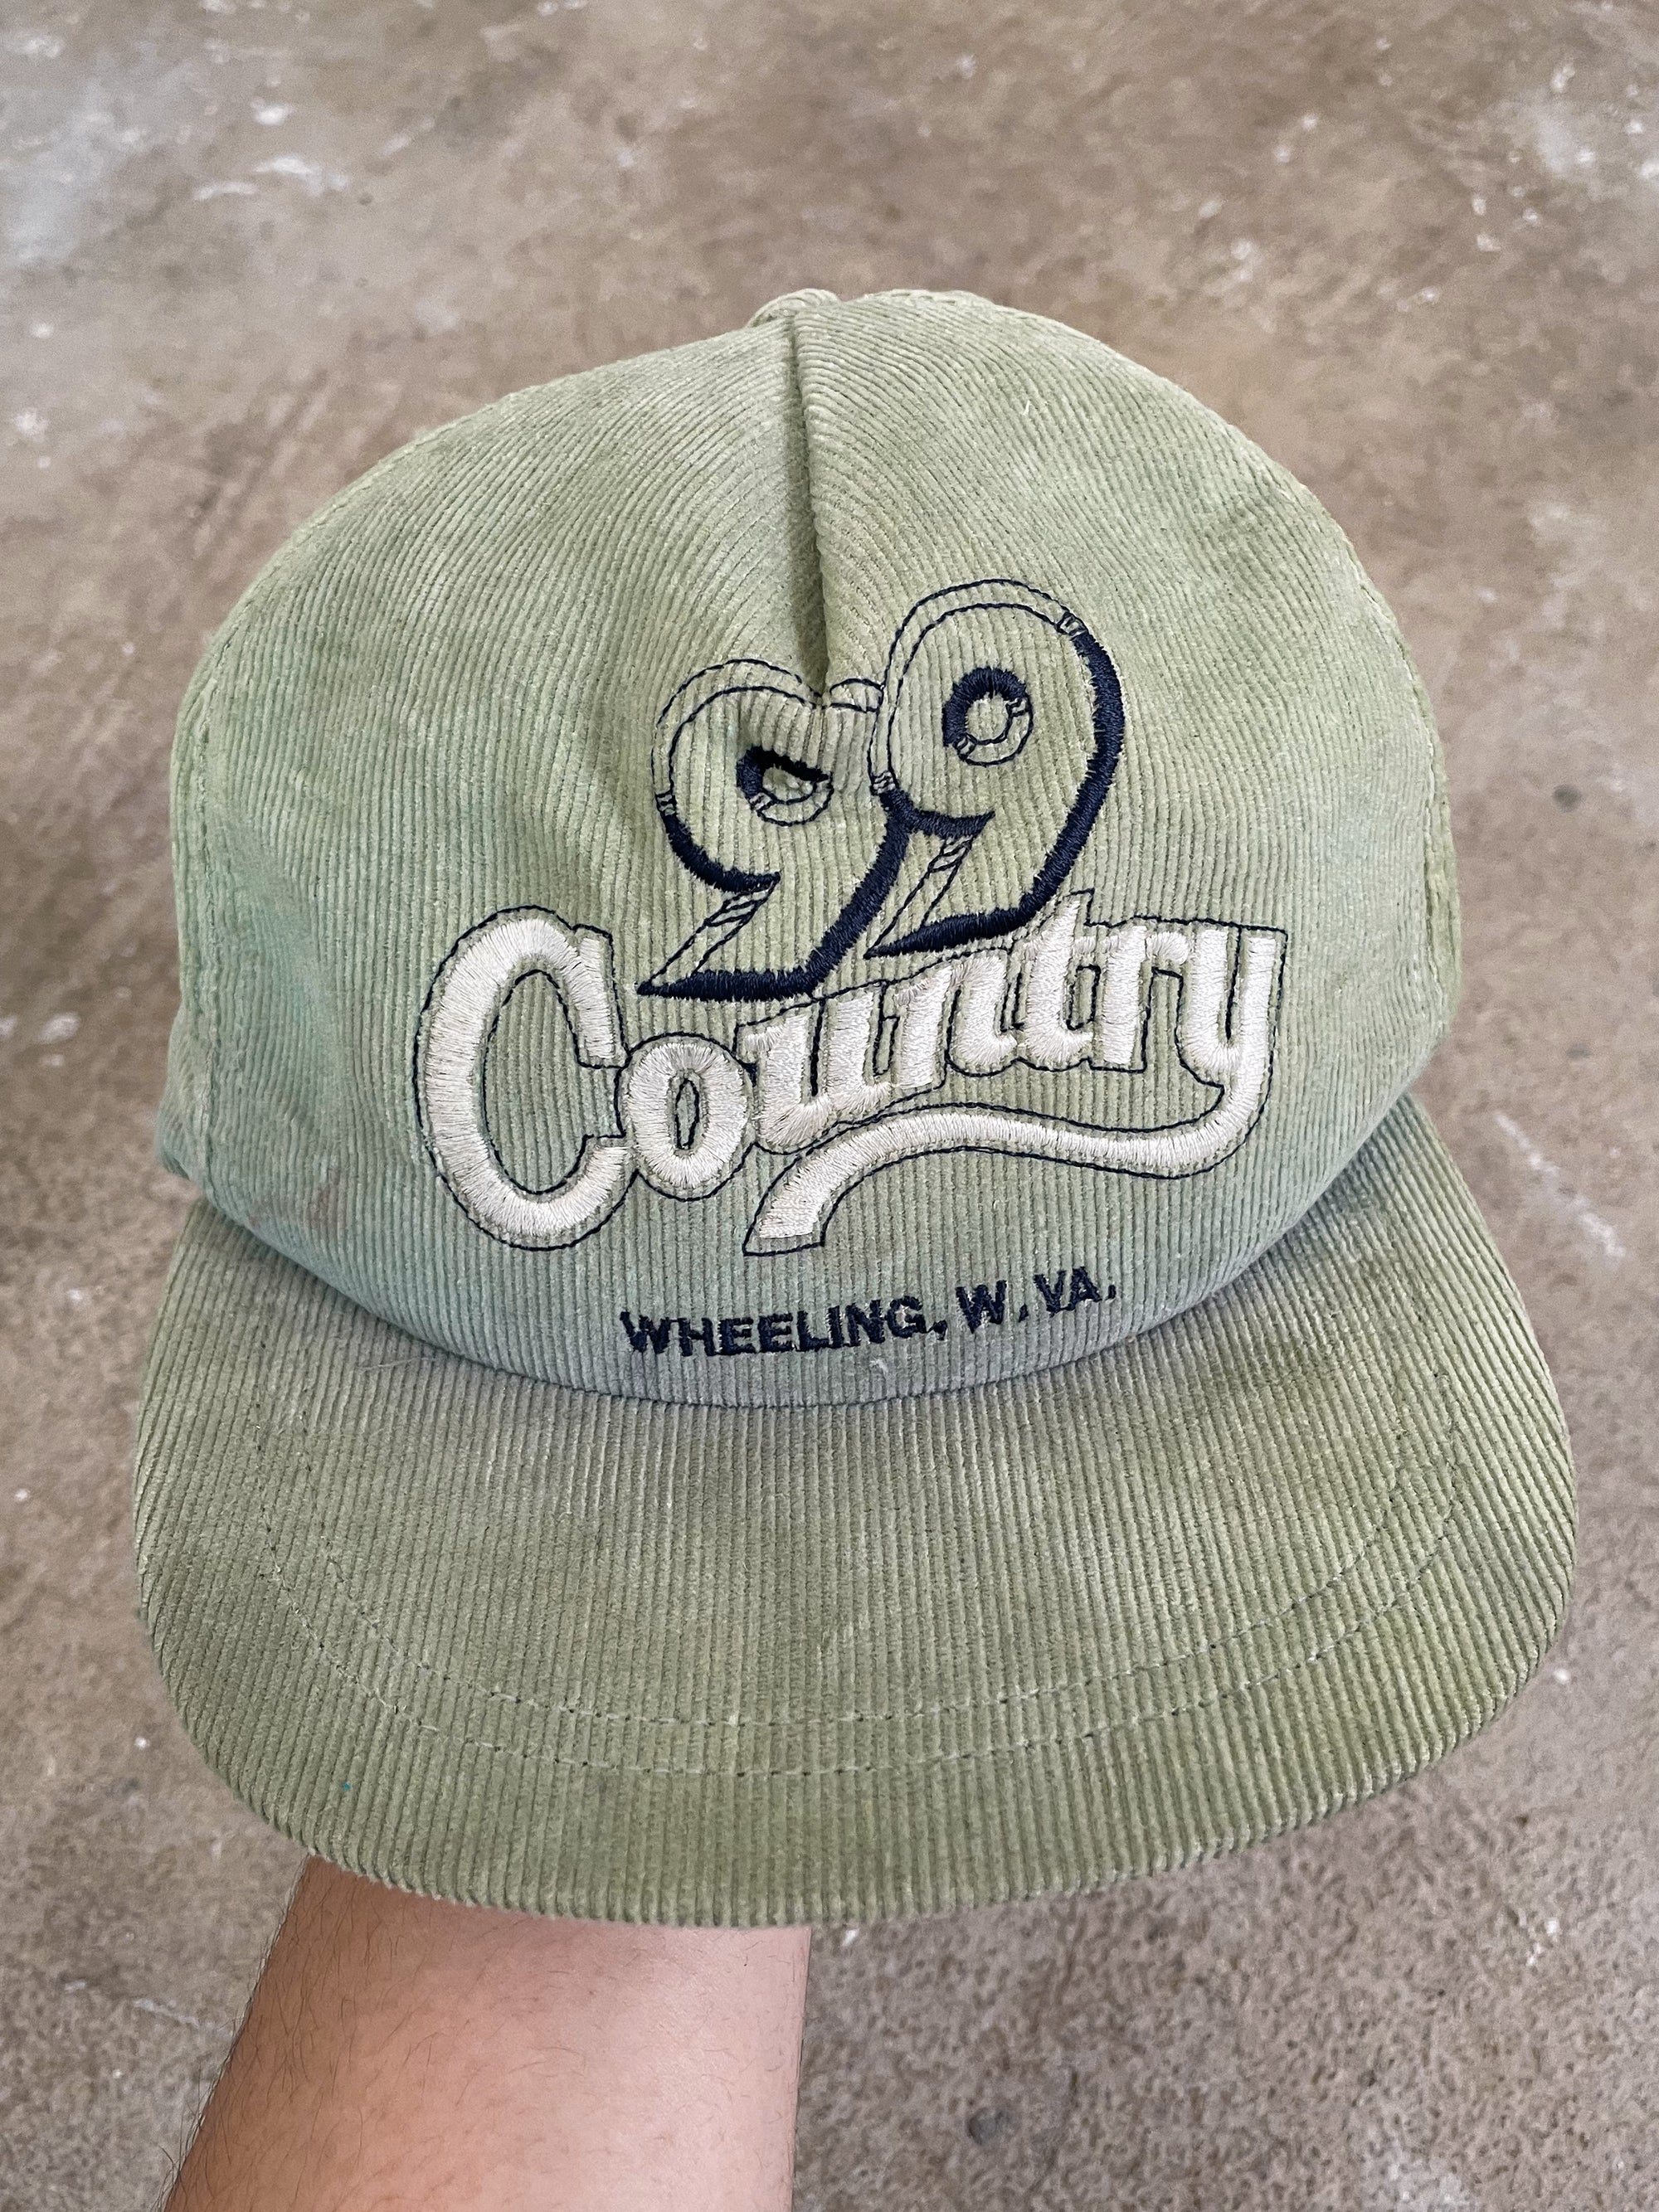 1980s “Country” Sun Faded Corduroy Trucker Hat